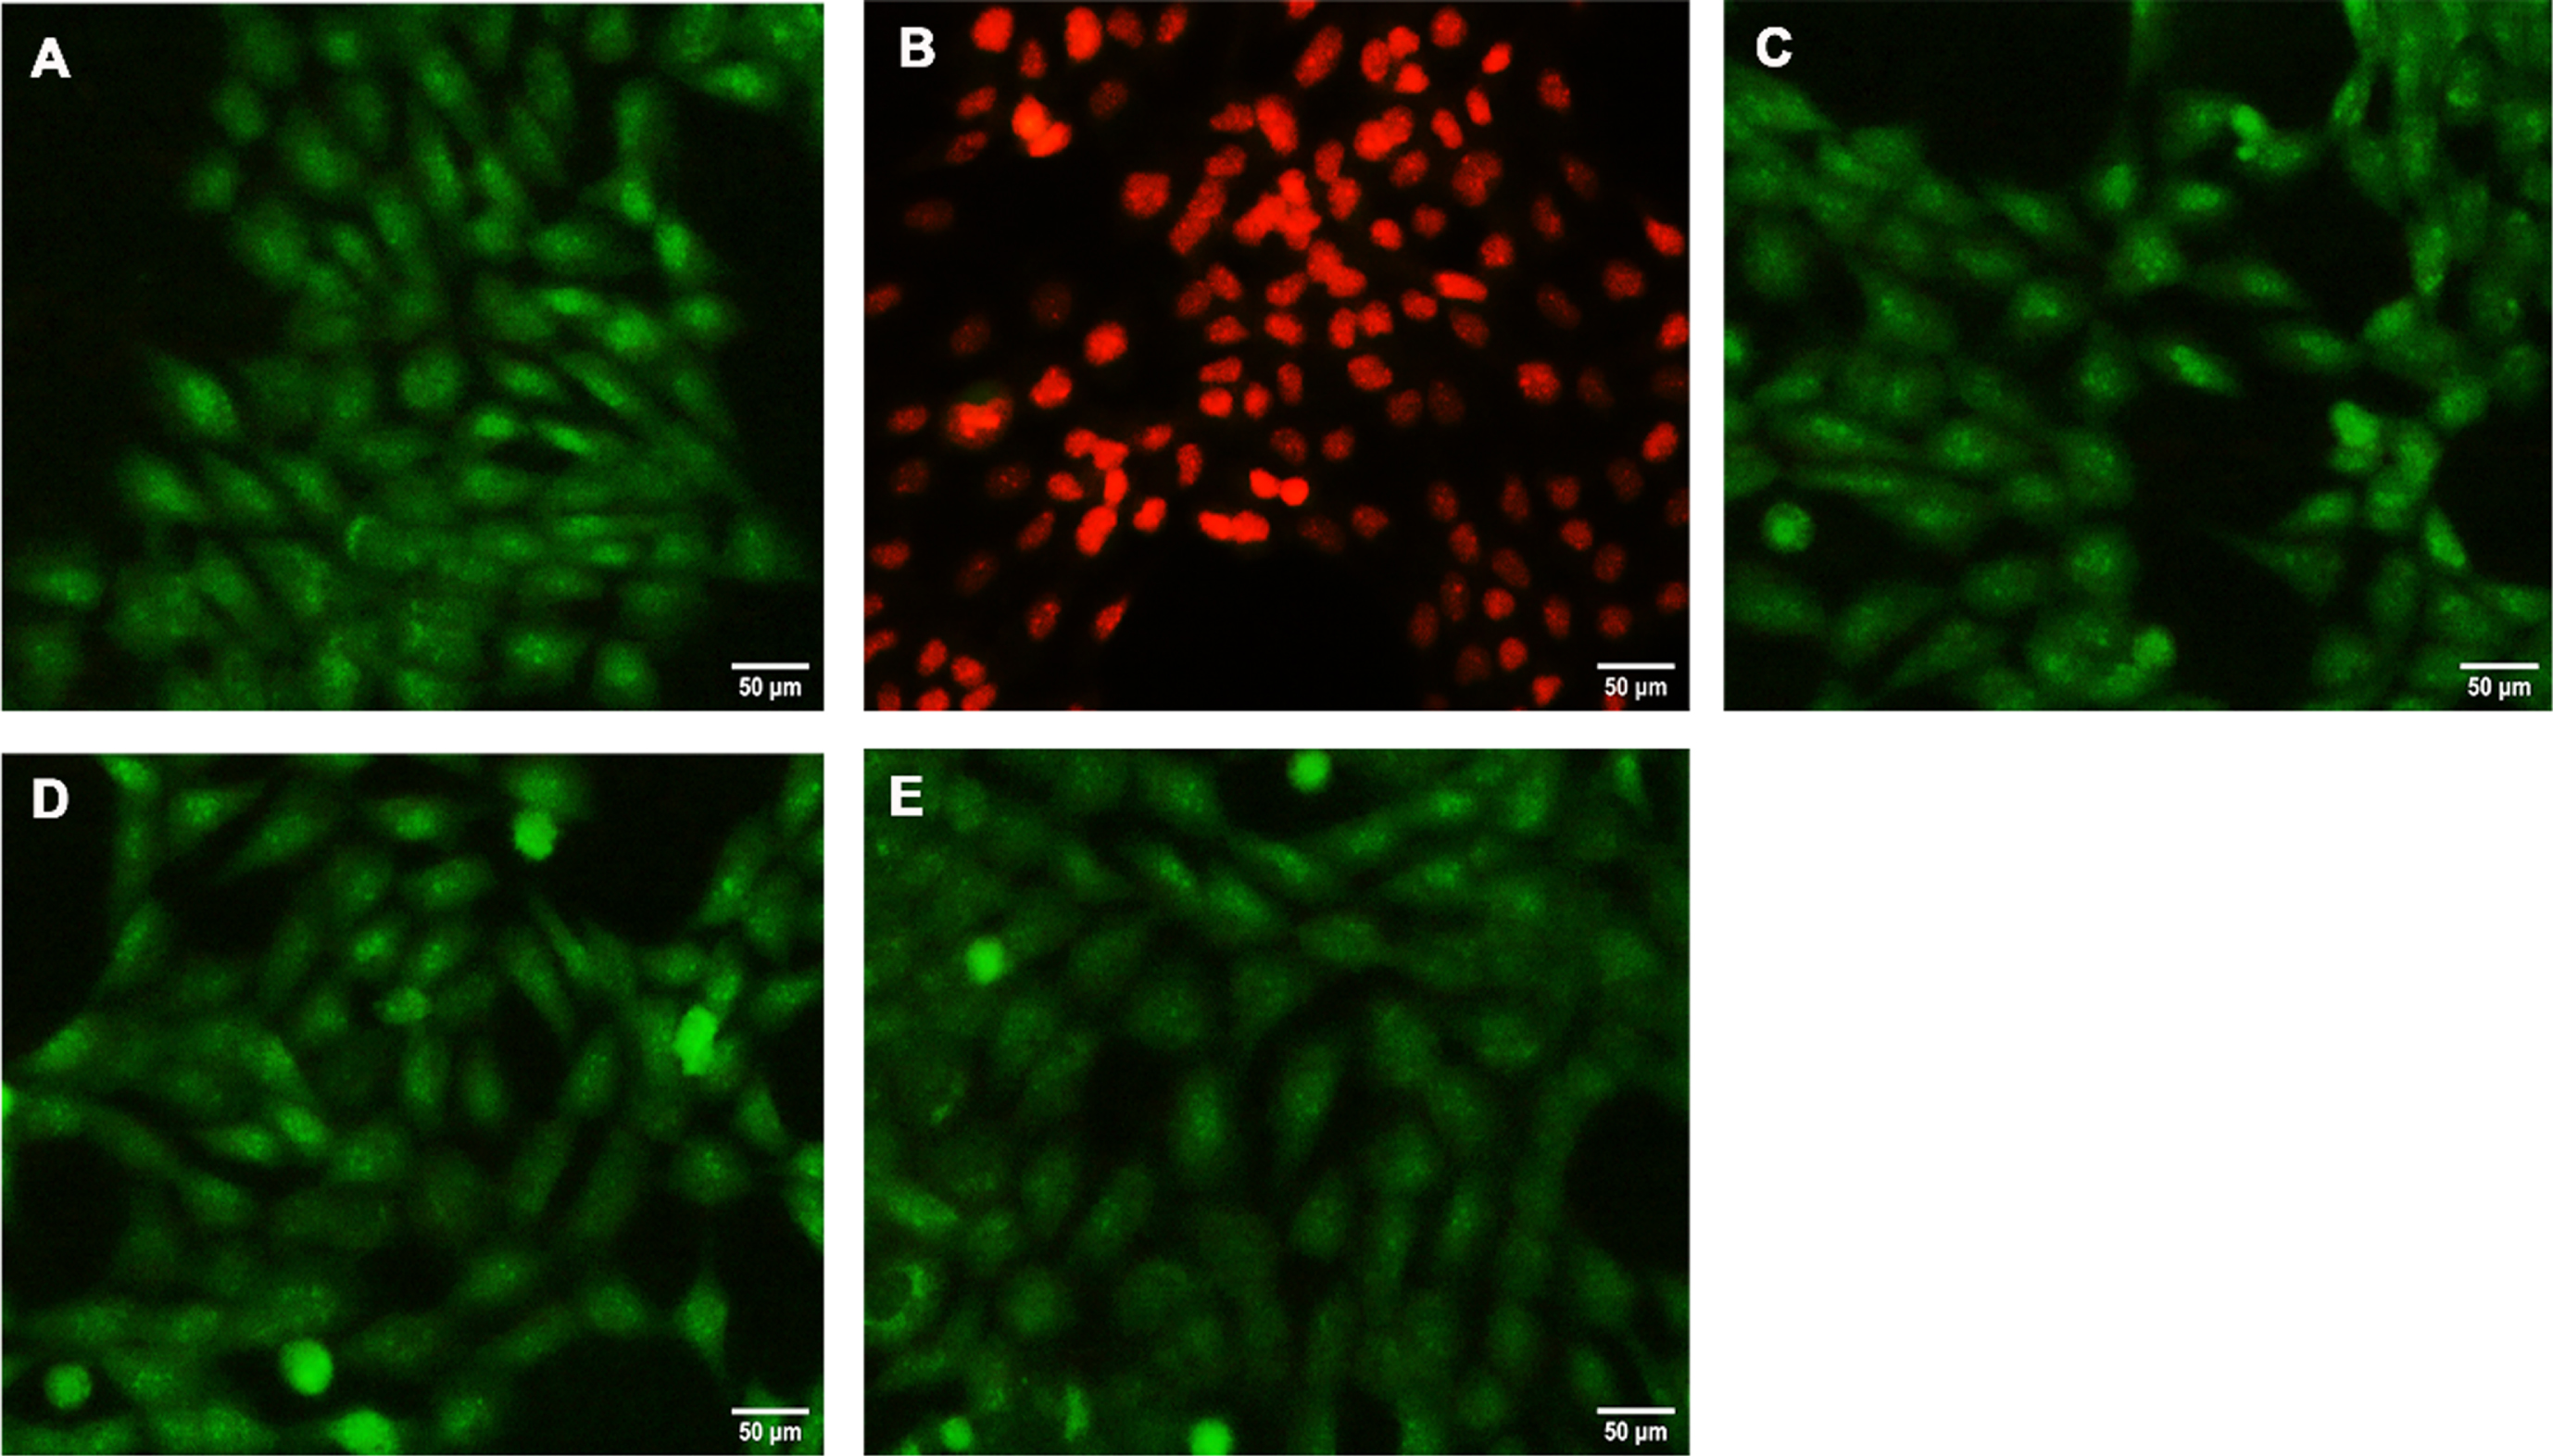 Fluorescent microscopic examination of inhibition of apoptosis by HS (A) Control (B) Glutamate (5 mM) (C) HS-5 + glutamate (D) HS-10 + glutamate (E) HS-10. Green staining indicates live cells and orange red staining denotes apoptotic cells.